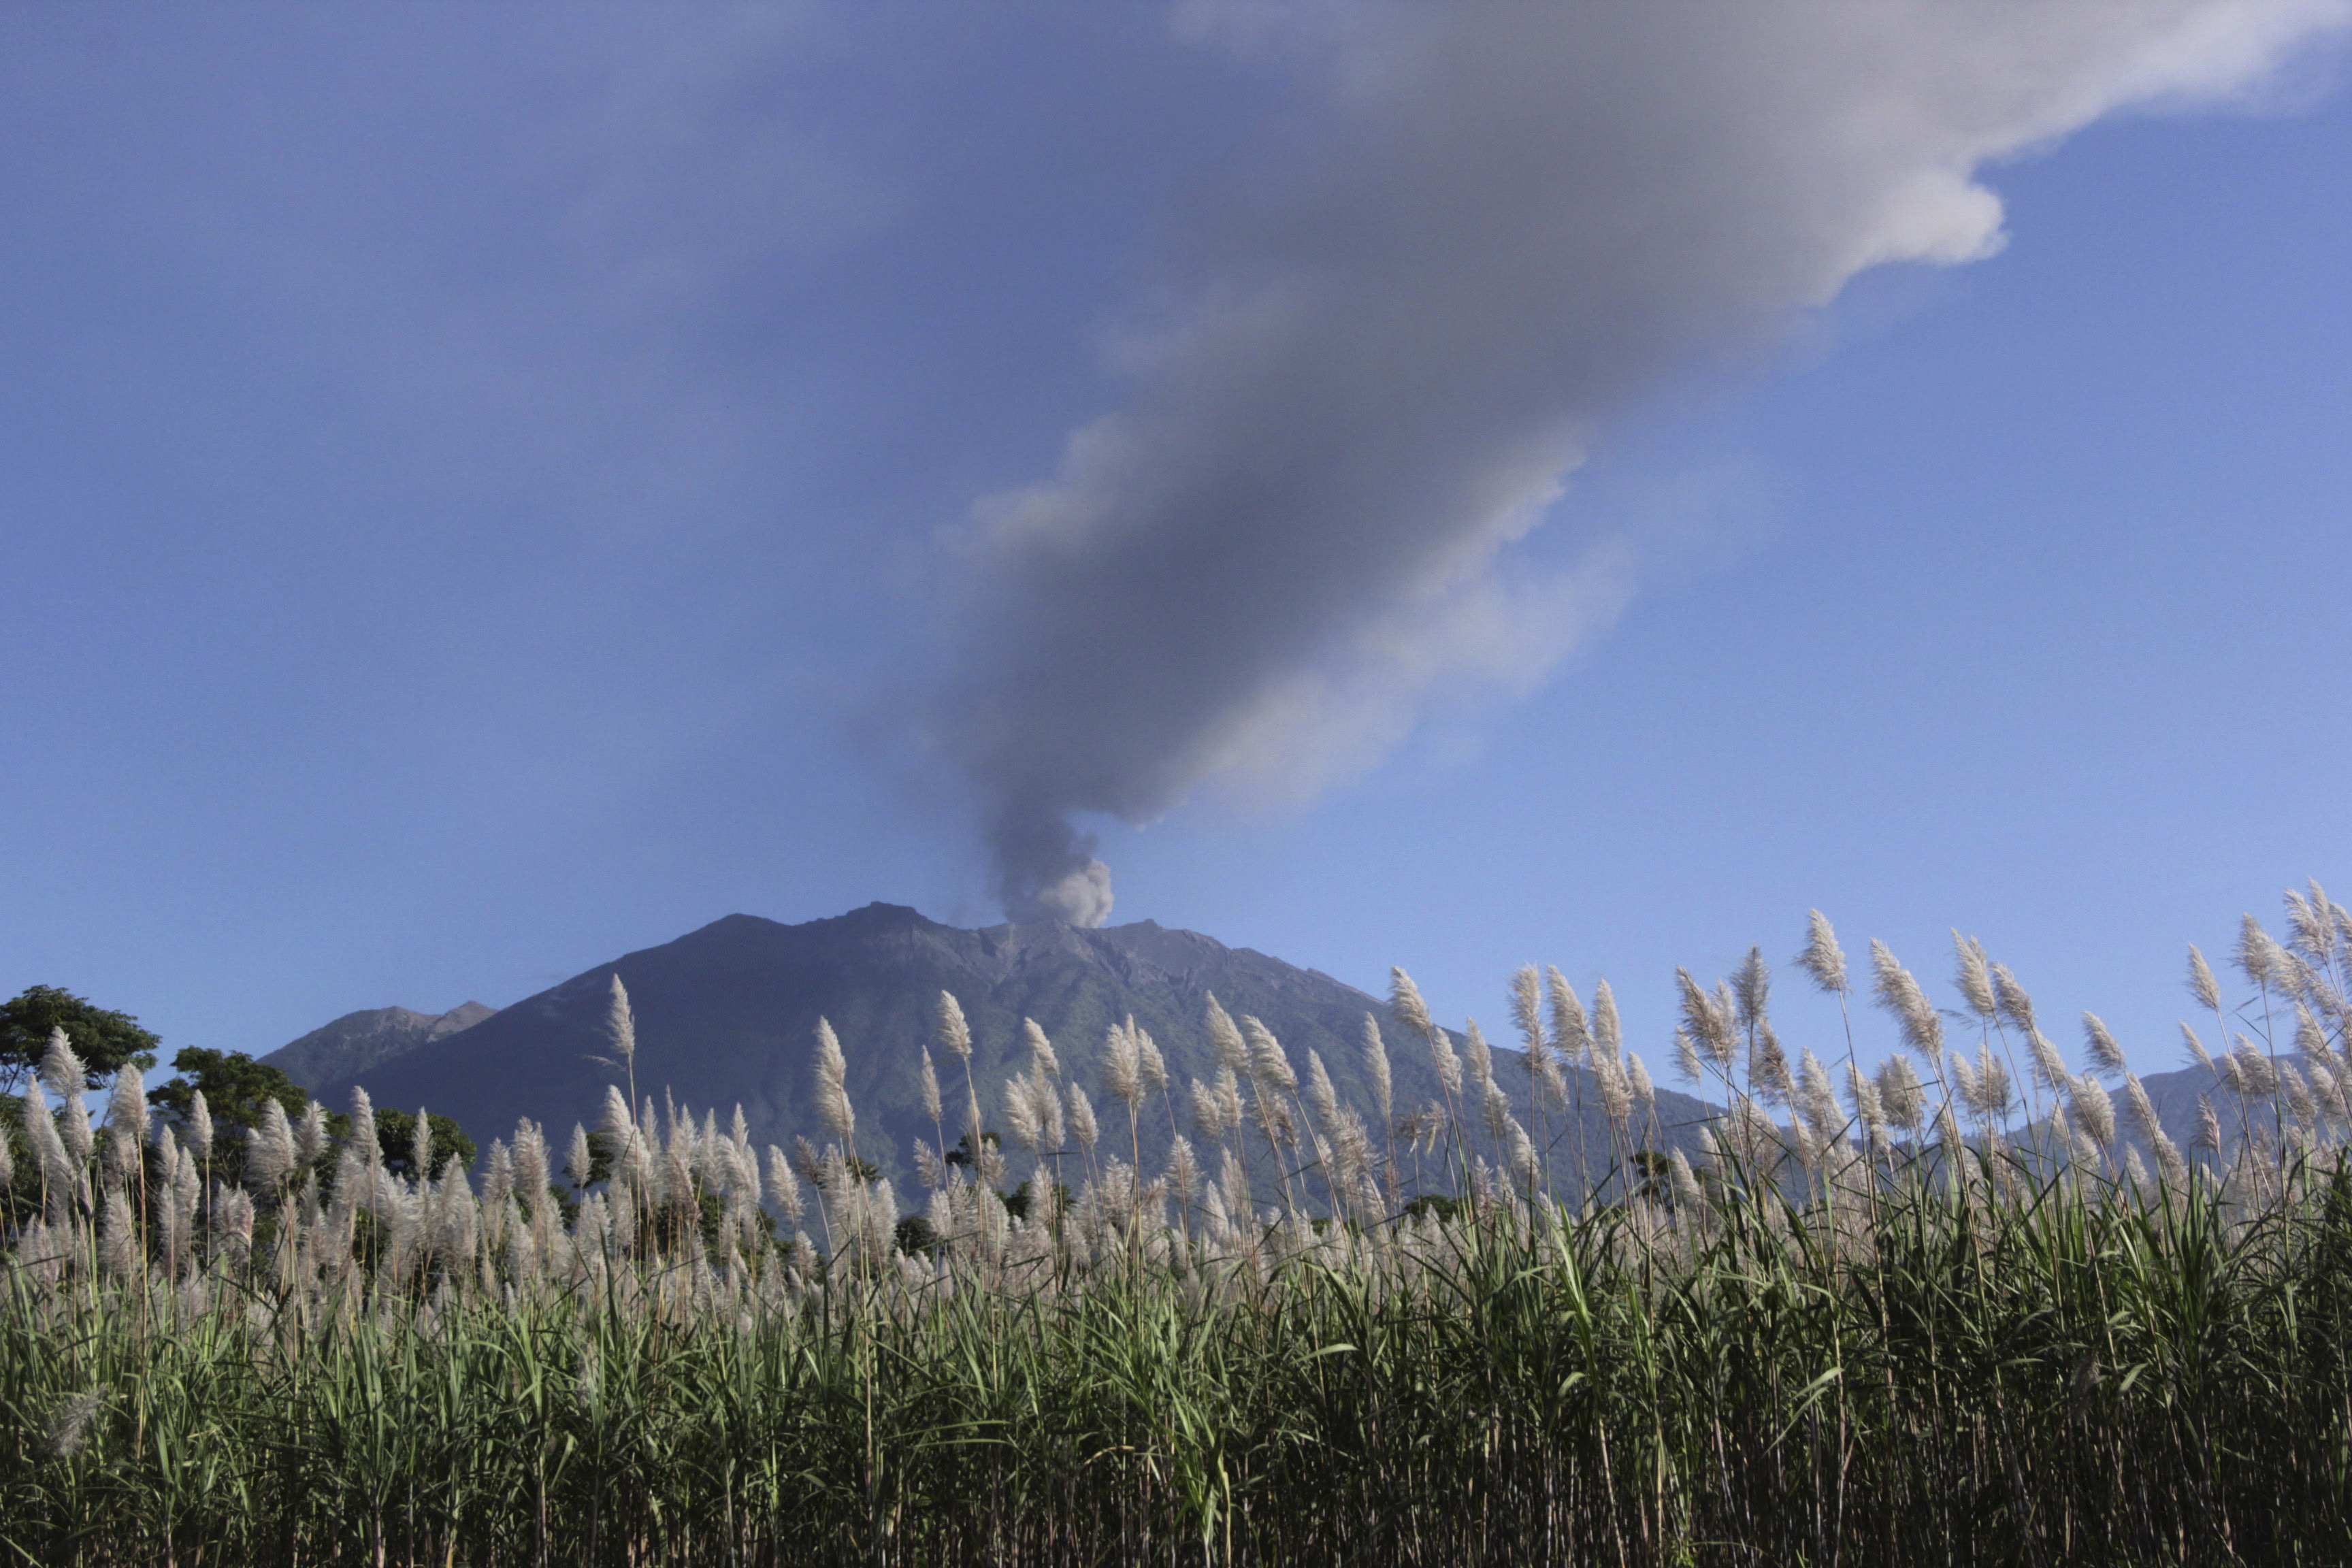 Ash and smoke are emitted from the volcano Mount Raung seen from the village of Sumber Arum, near Banyuwangi, East Java province,  Indonesia on July 4, 2015 (Budi Candra Setya—Antara Photo Agency/Reuters)